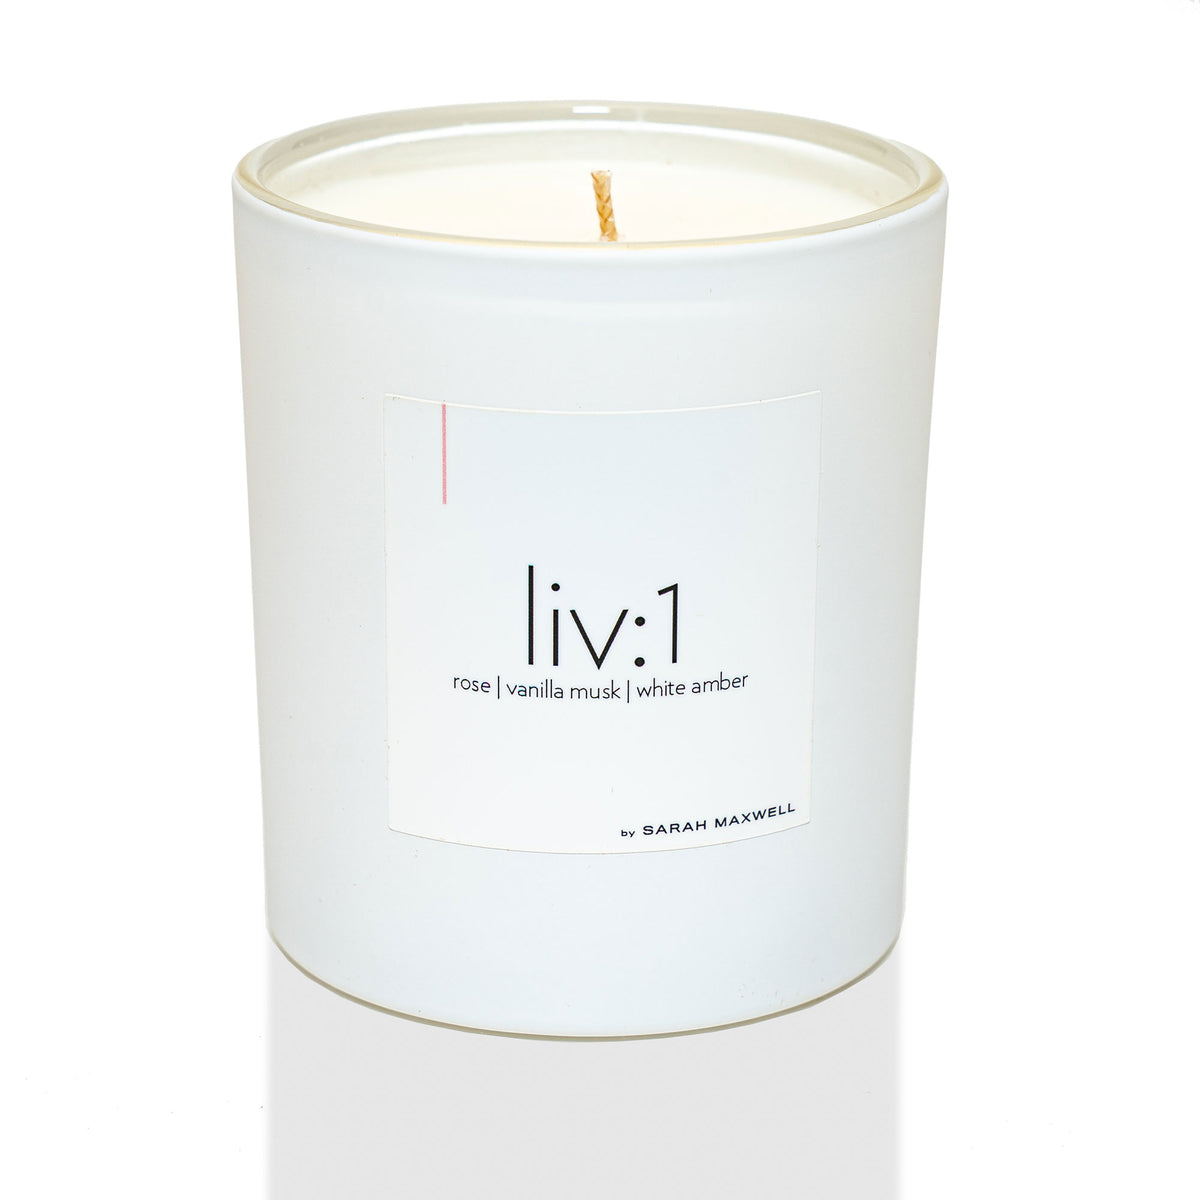 Vanilla Musk Candle Scent